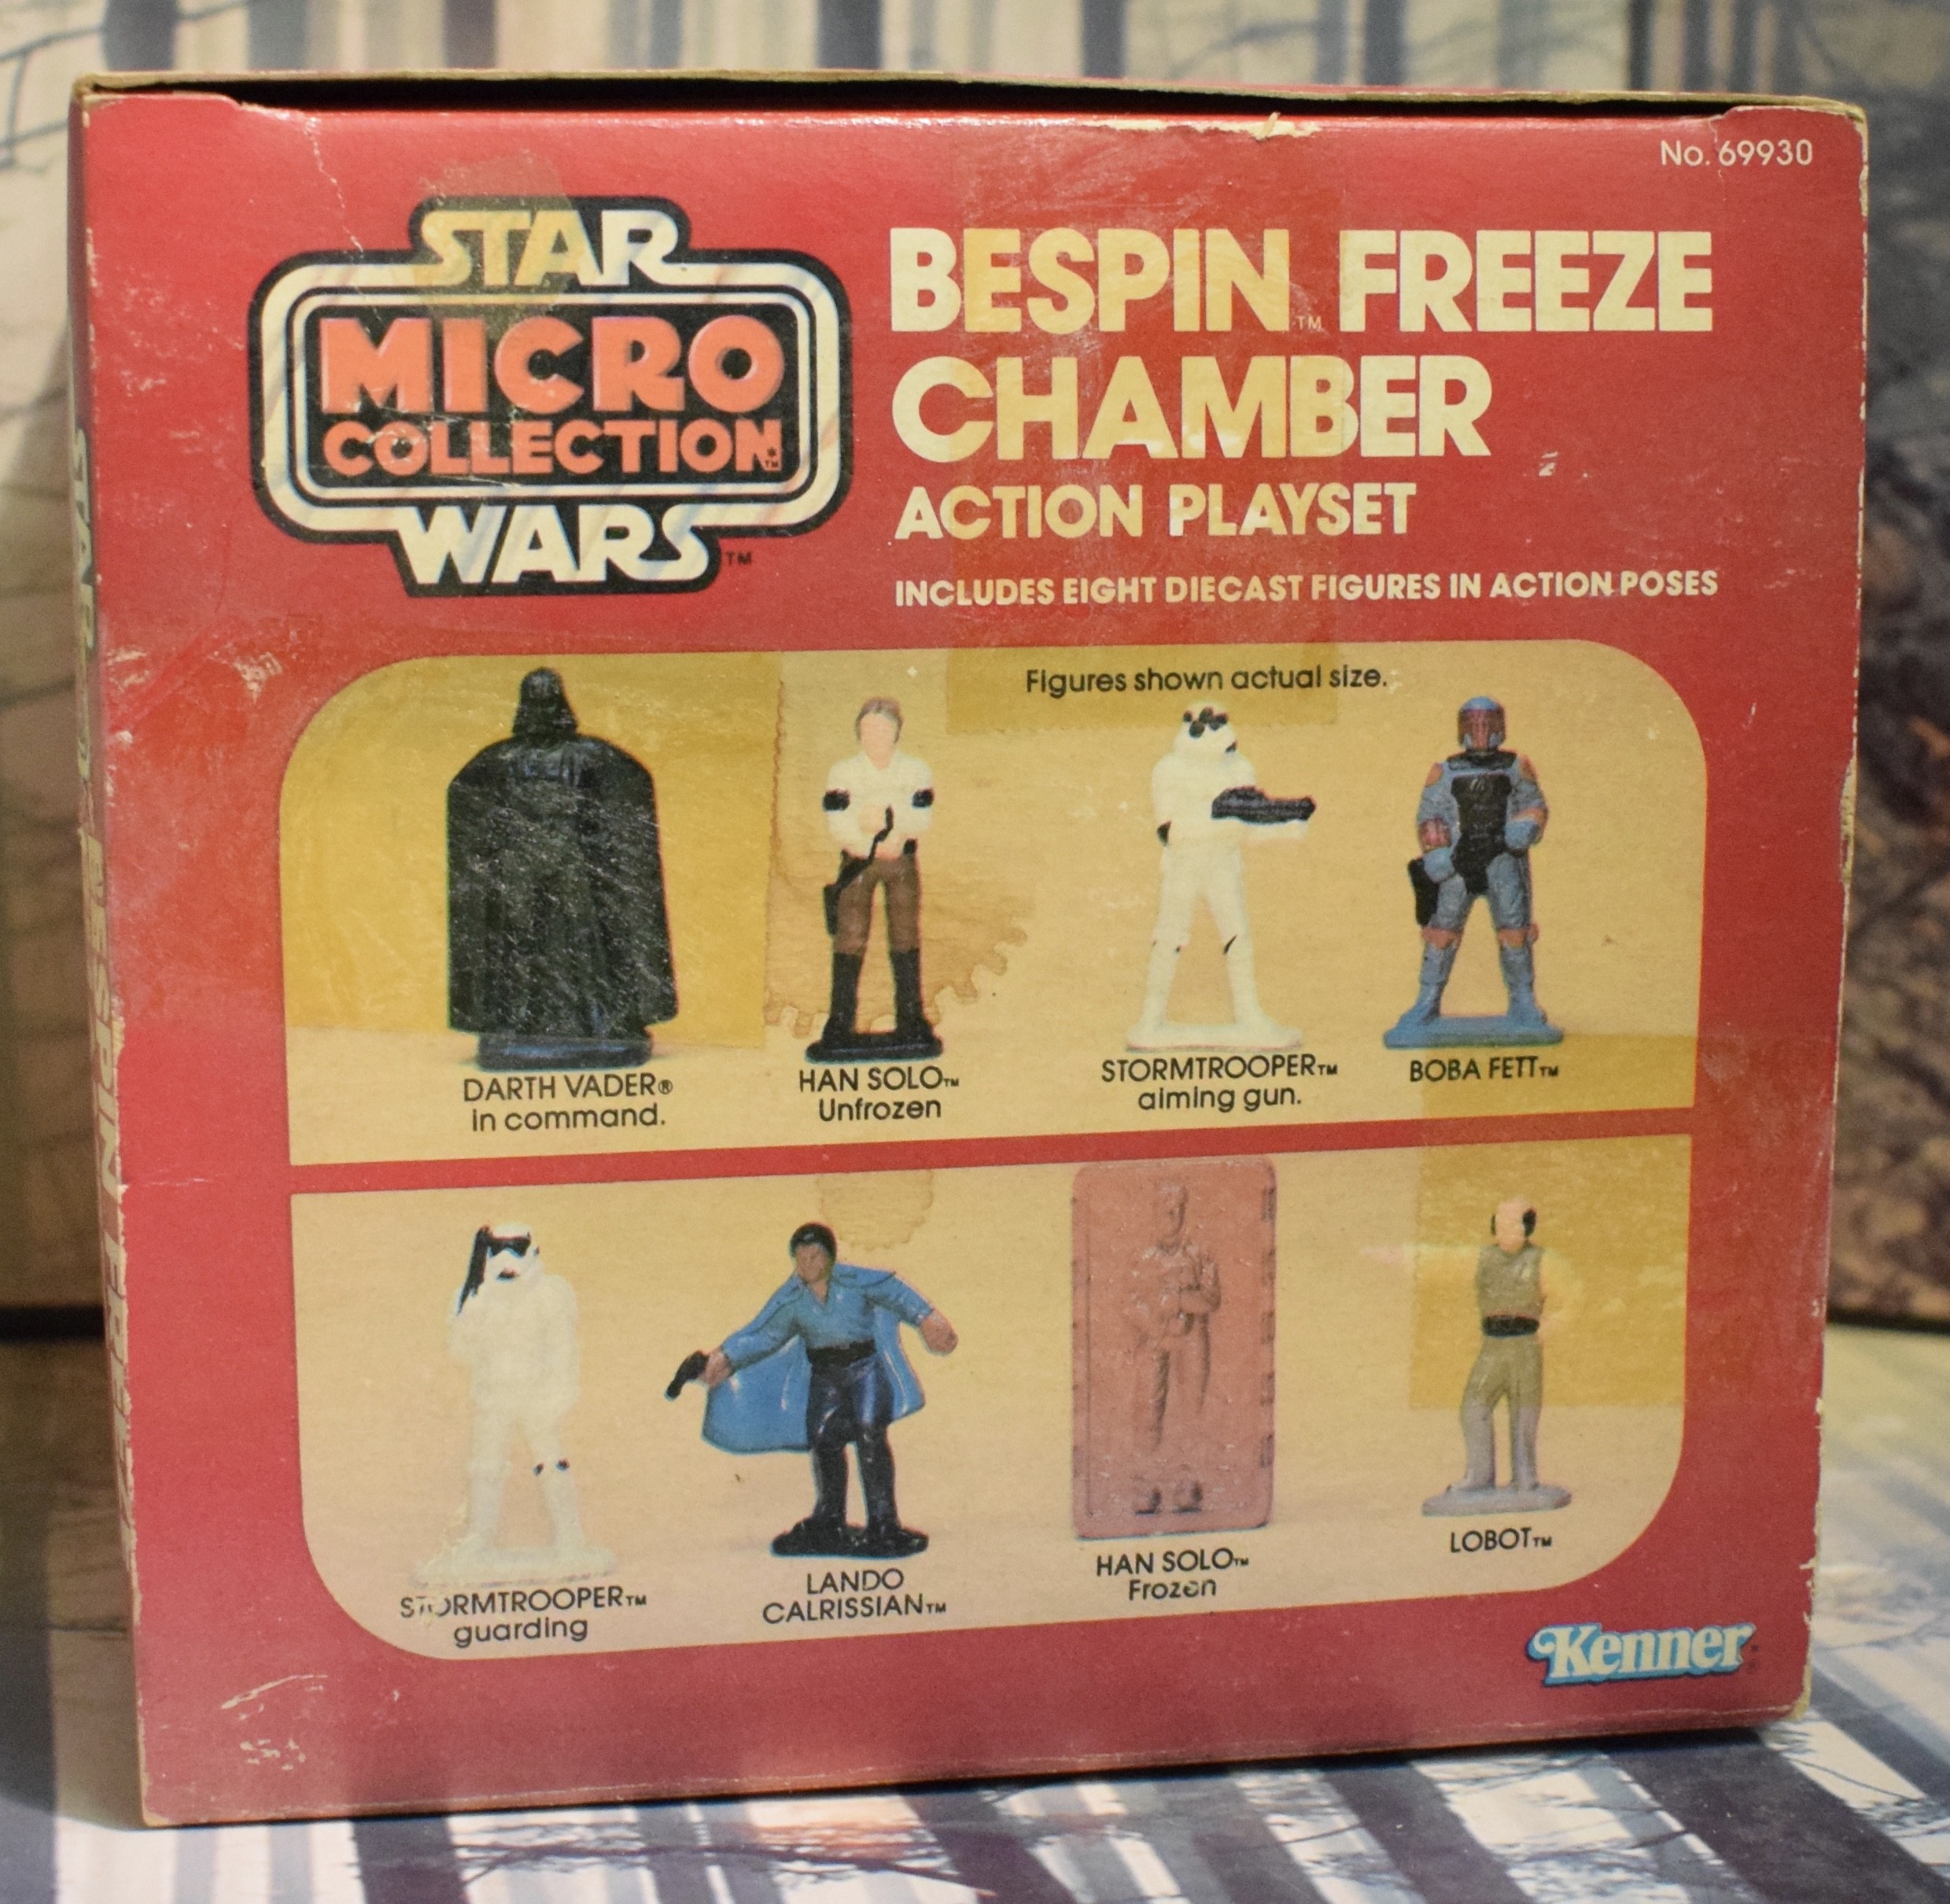 VINTAGE STAR WARS KENNER MICRO COLLECTION BESPIN FREEZING CHAMBER ACTION PLAYSET